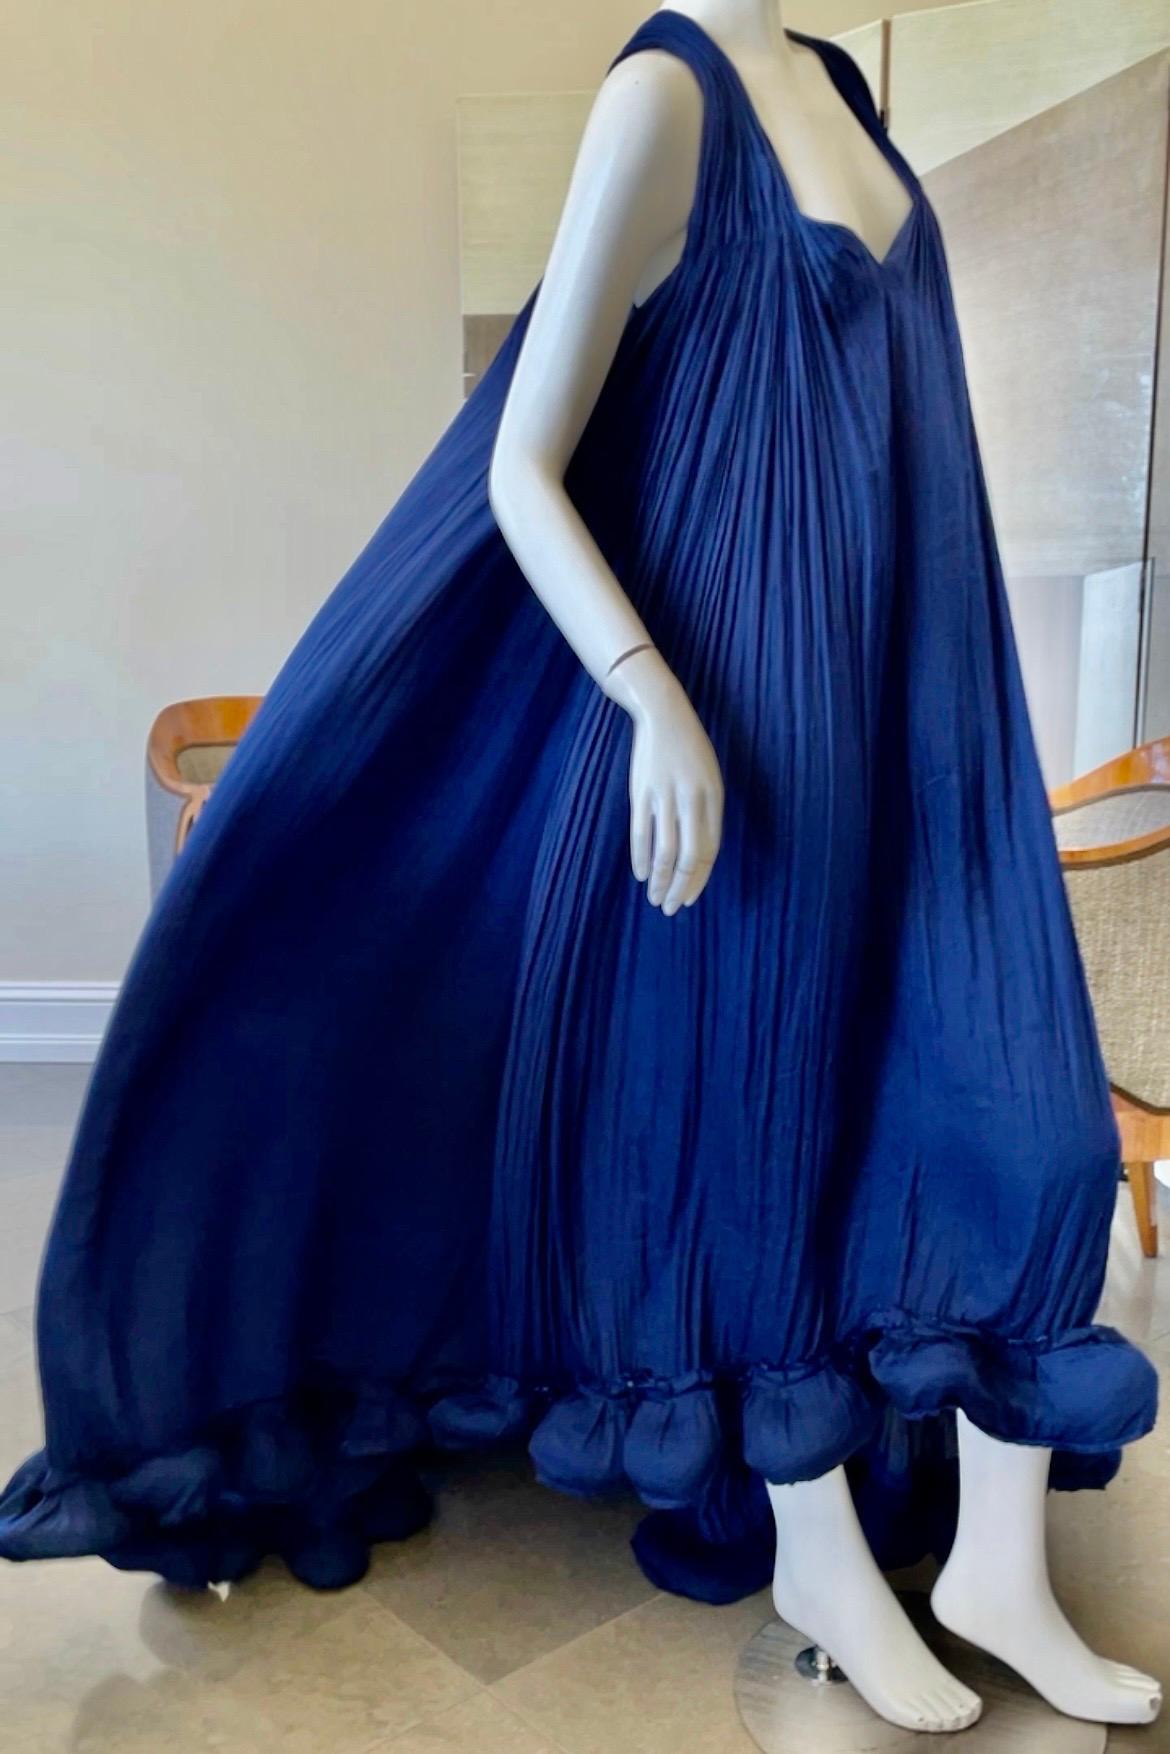 Lanvin Blue Pleated Evening Dress with Dramatic Train from Spring 2008 by Alber Elbaz .
My favorite collection from Lanvin, I always have my eye out for these voluminous dresses from this season.
Size 40
Bust 40